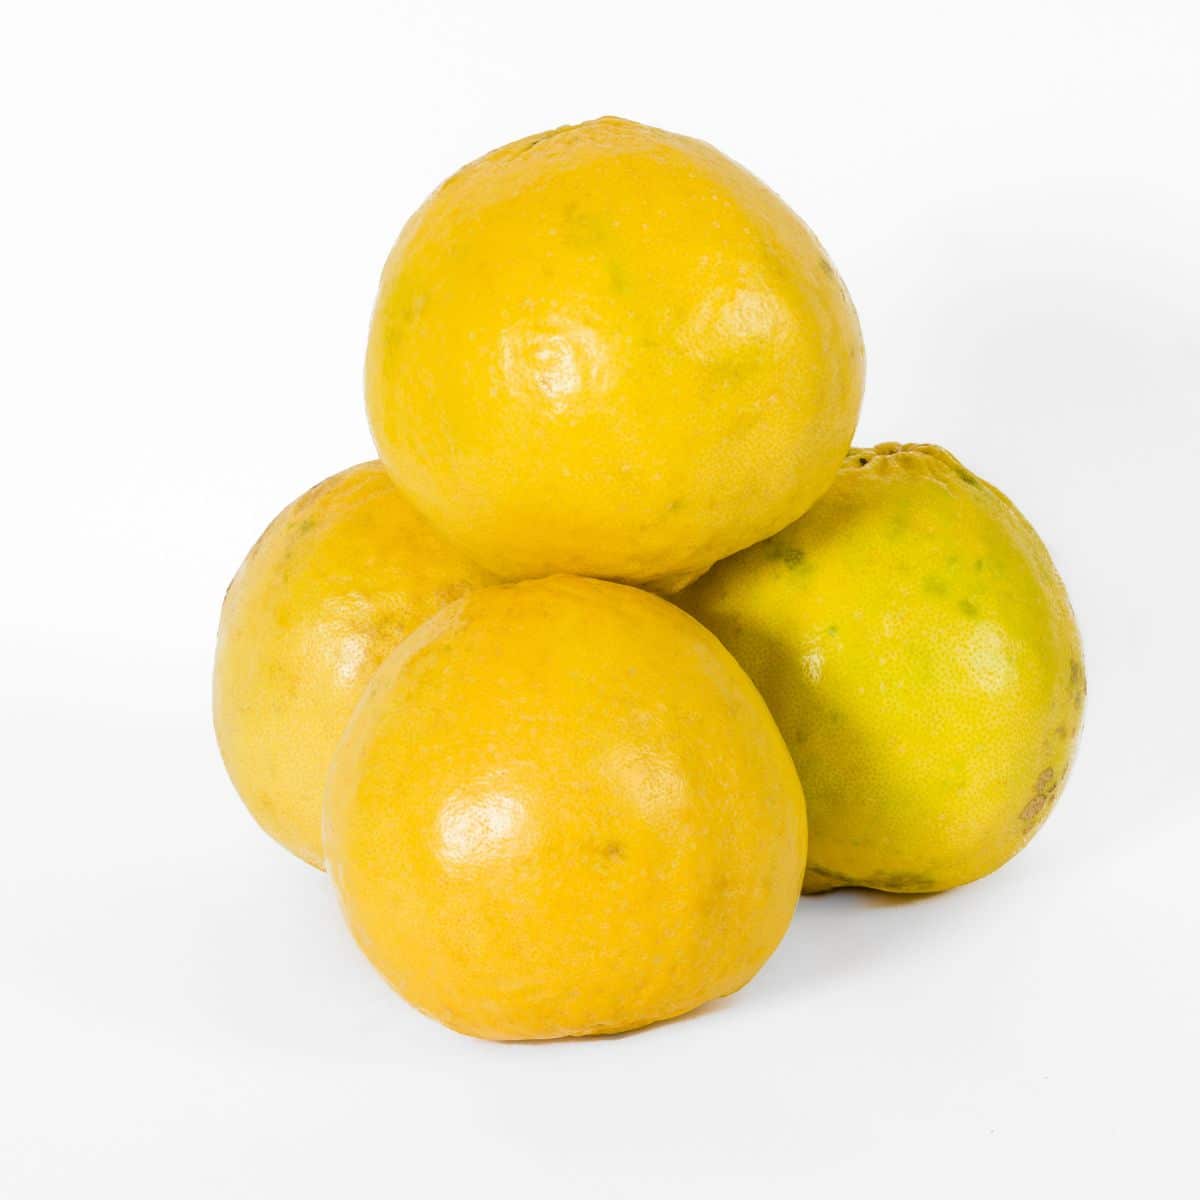 A stack of wild lemons on a white background.